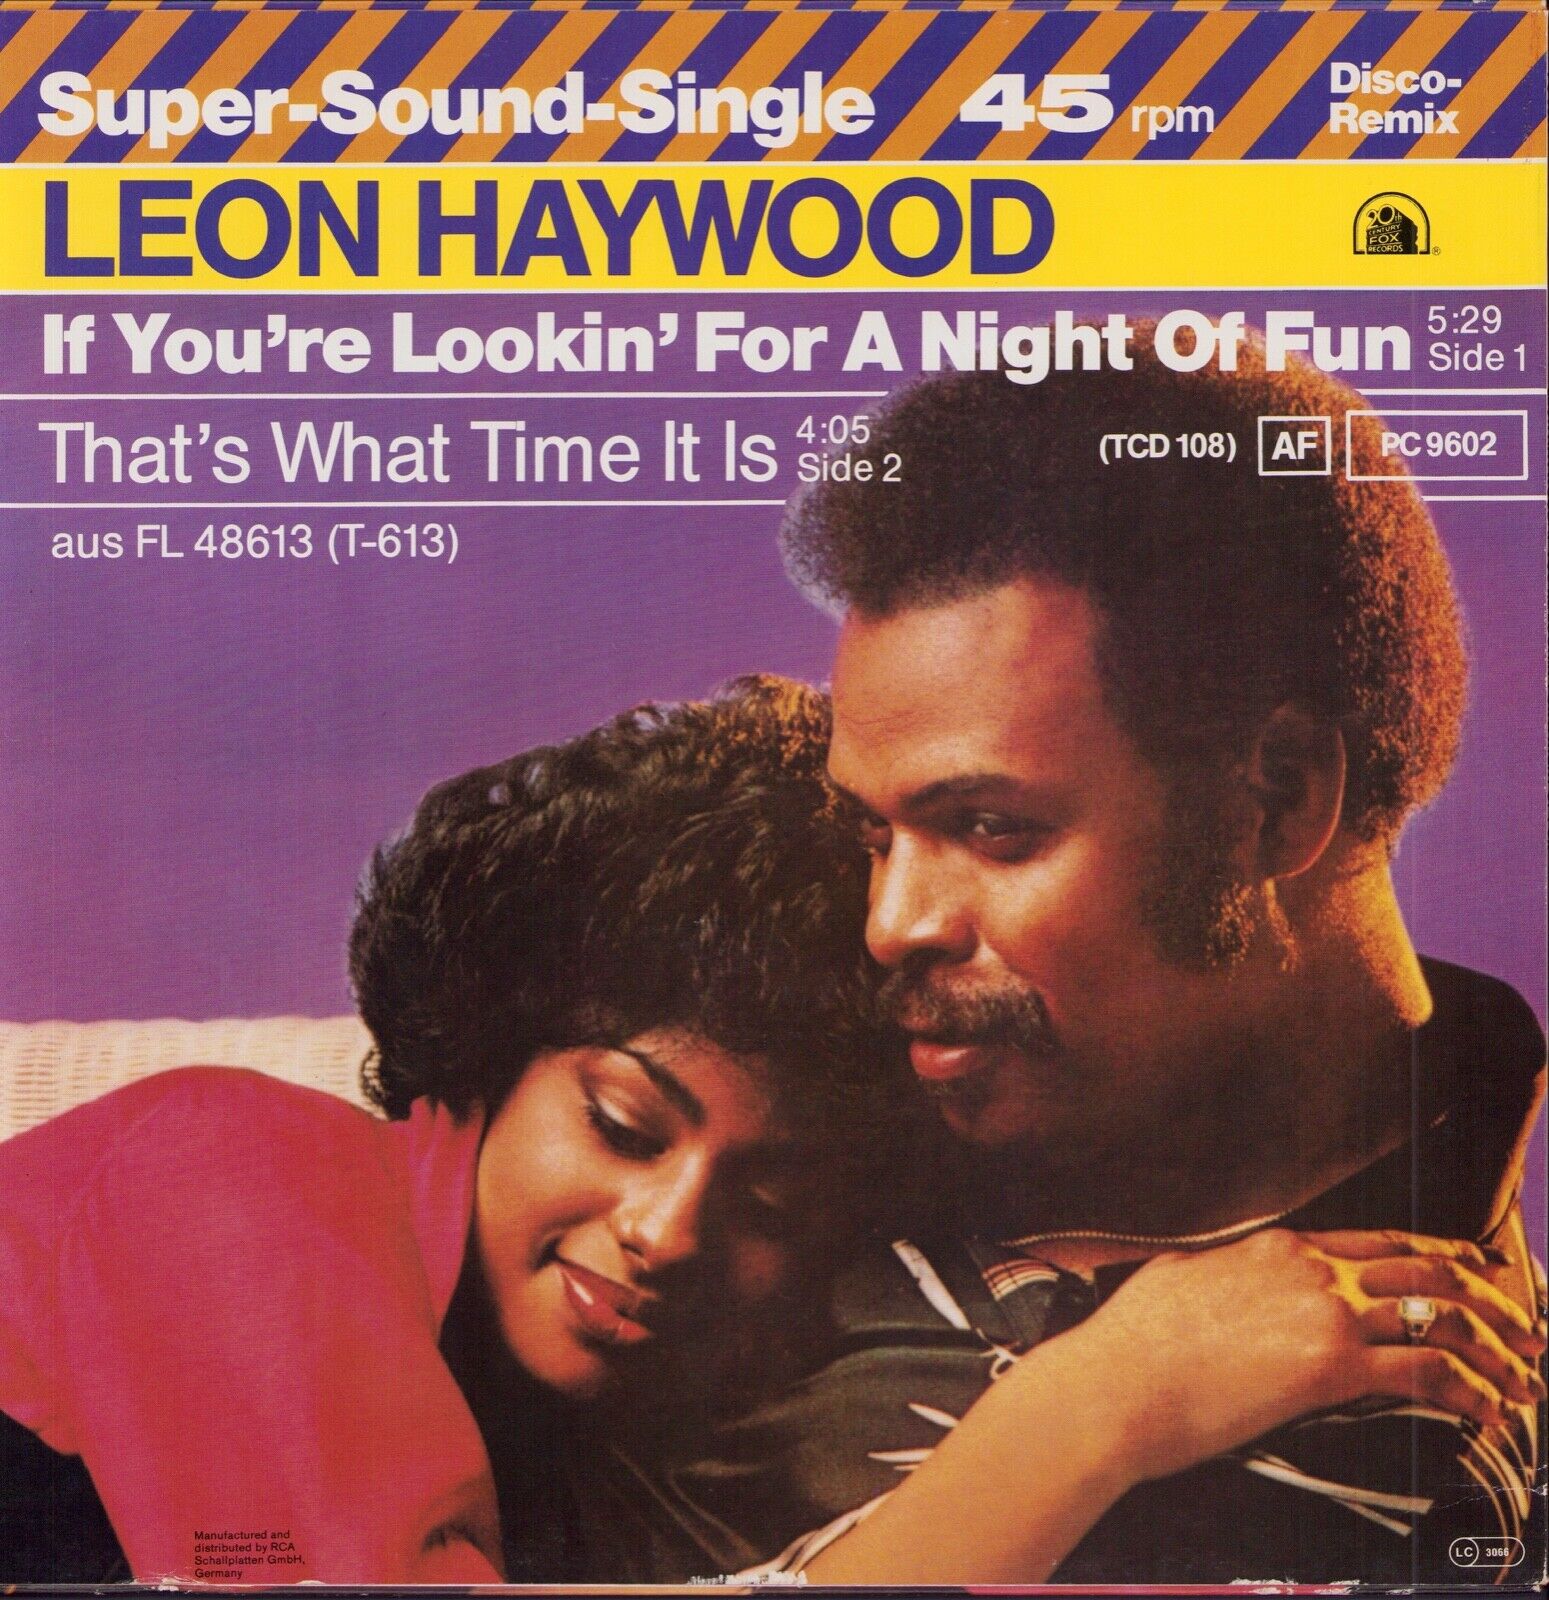 Leon Haywood ‎- If You're Looking For A Night Of Fun Look Past Me, I'm Not The One Vinyl 12"